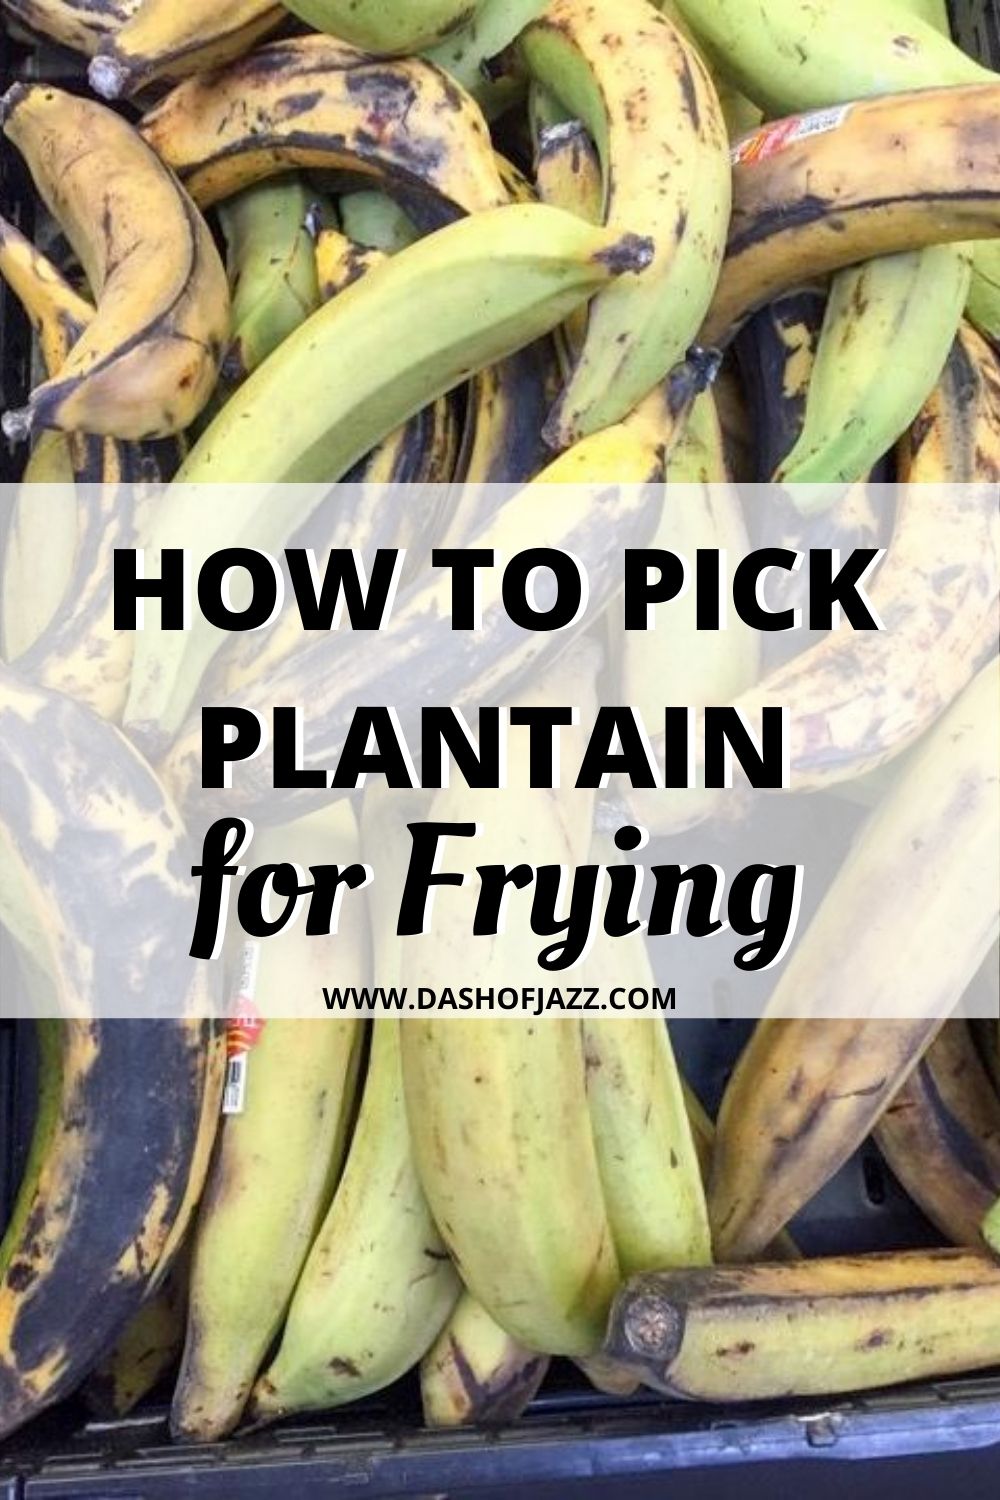 plantains in a basket with text overlay "how to pick plantain for frying"